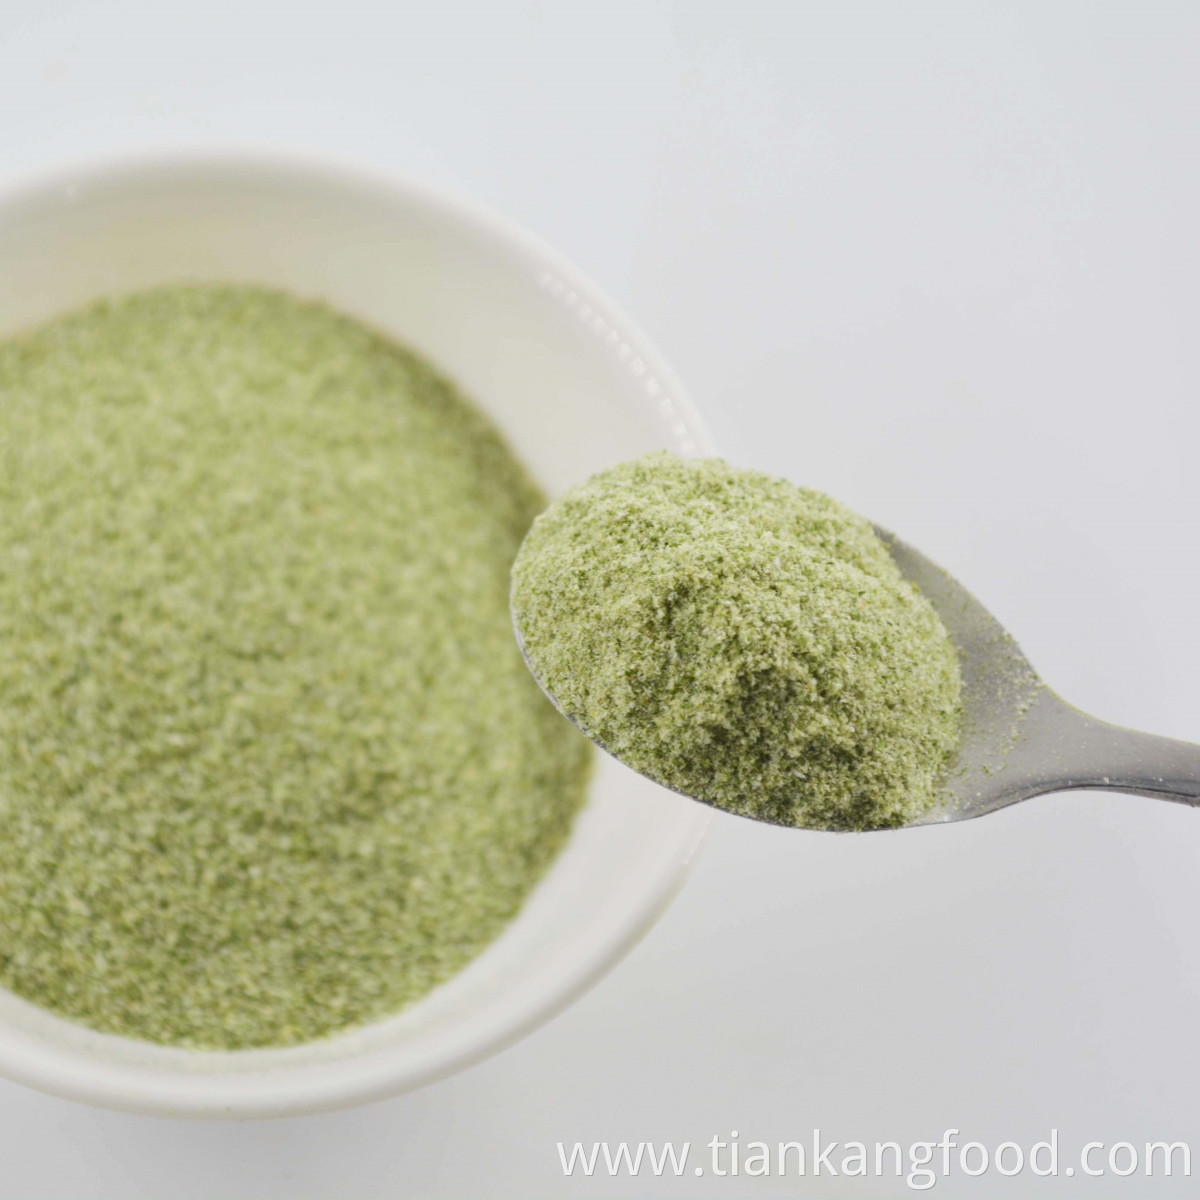 Dehydrated chive powder